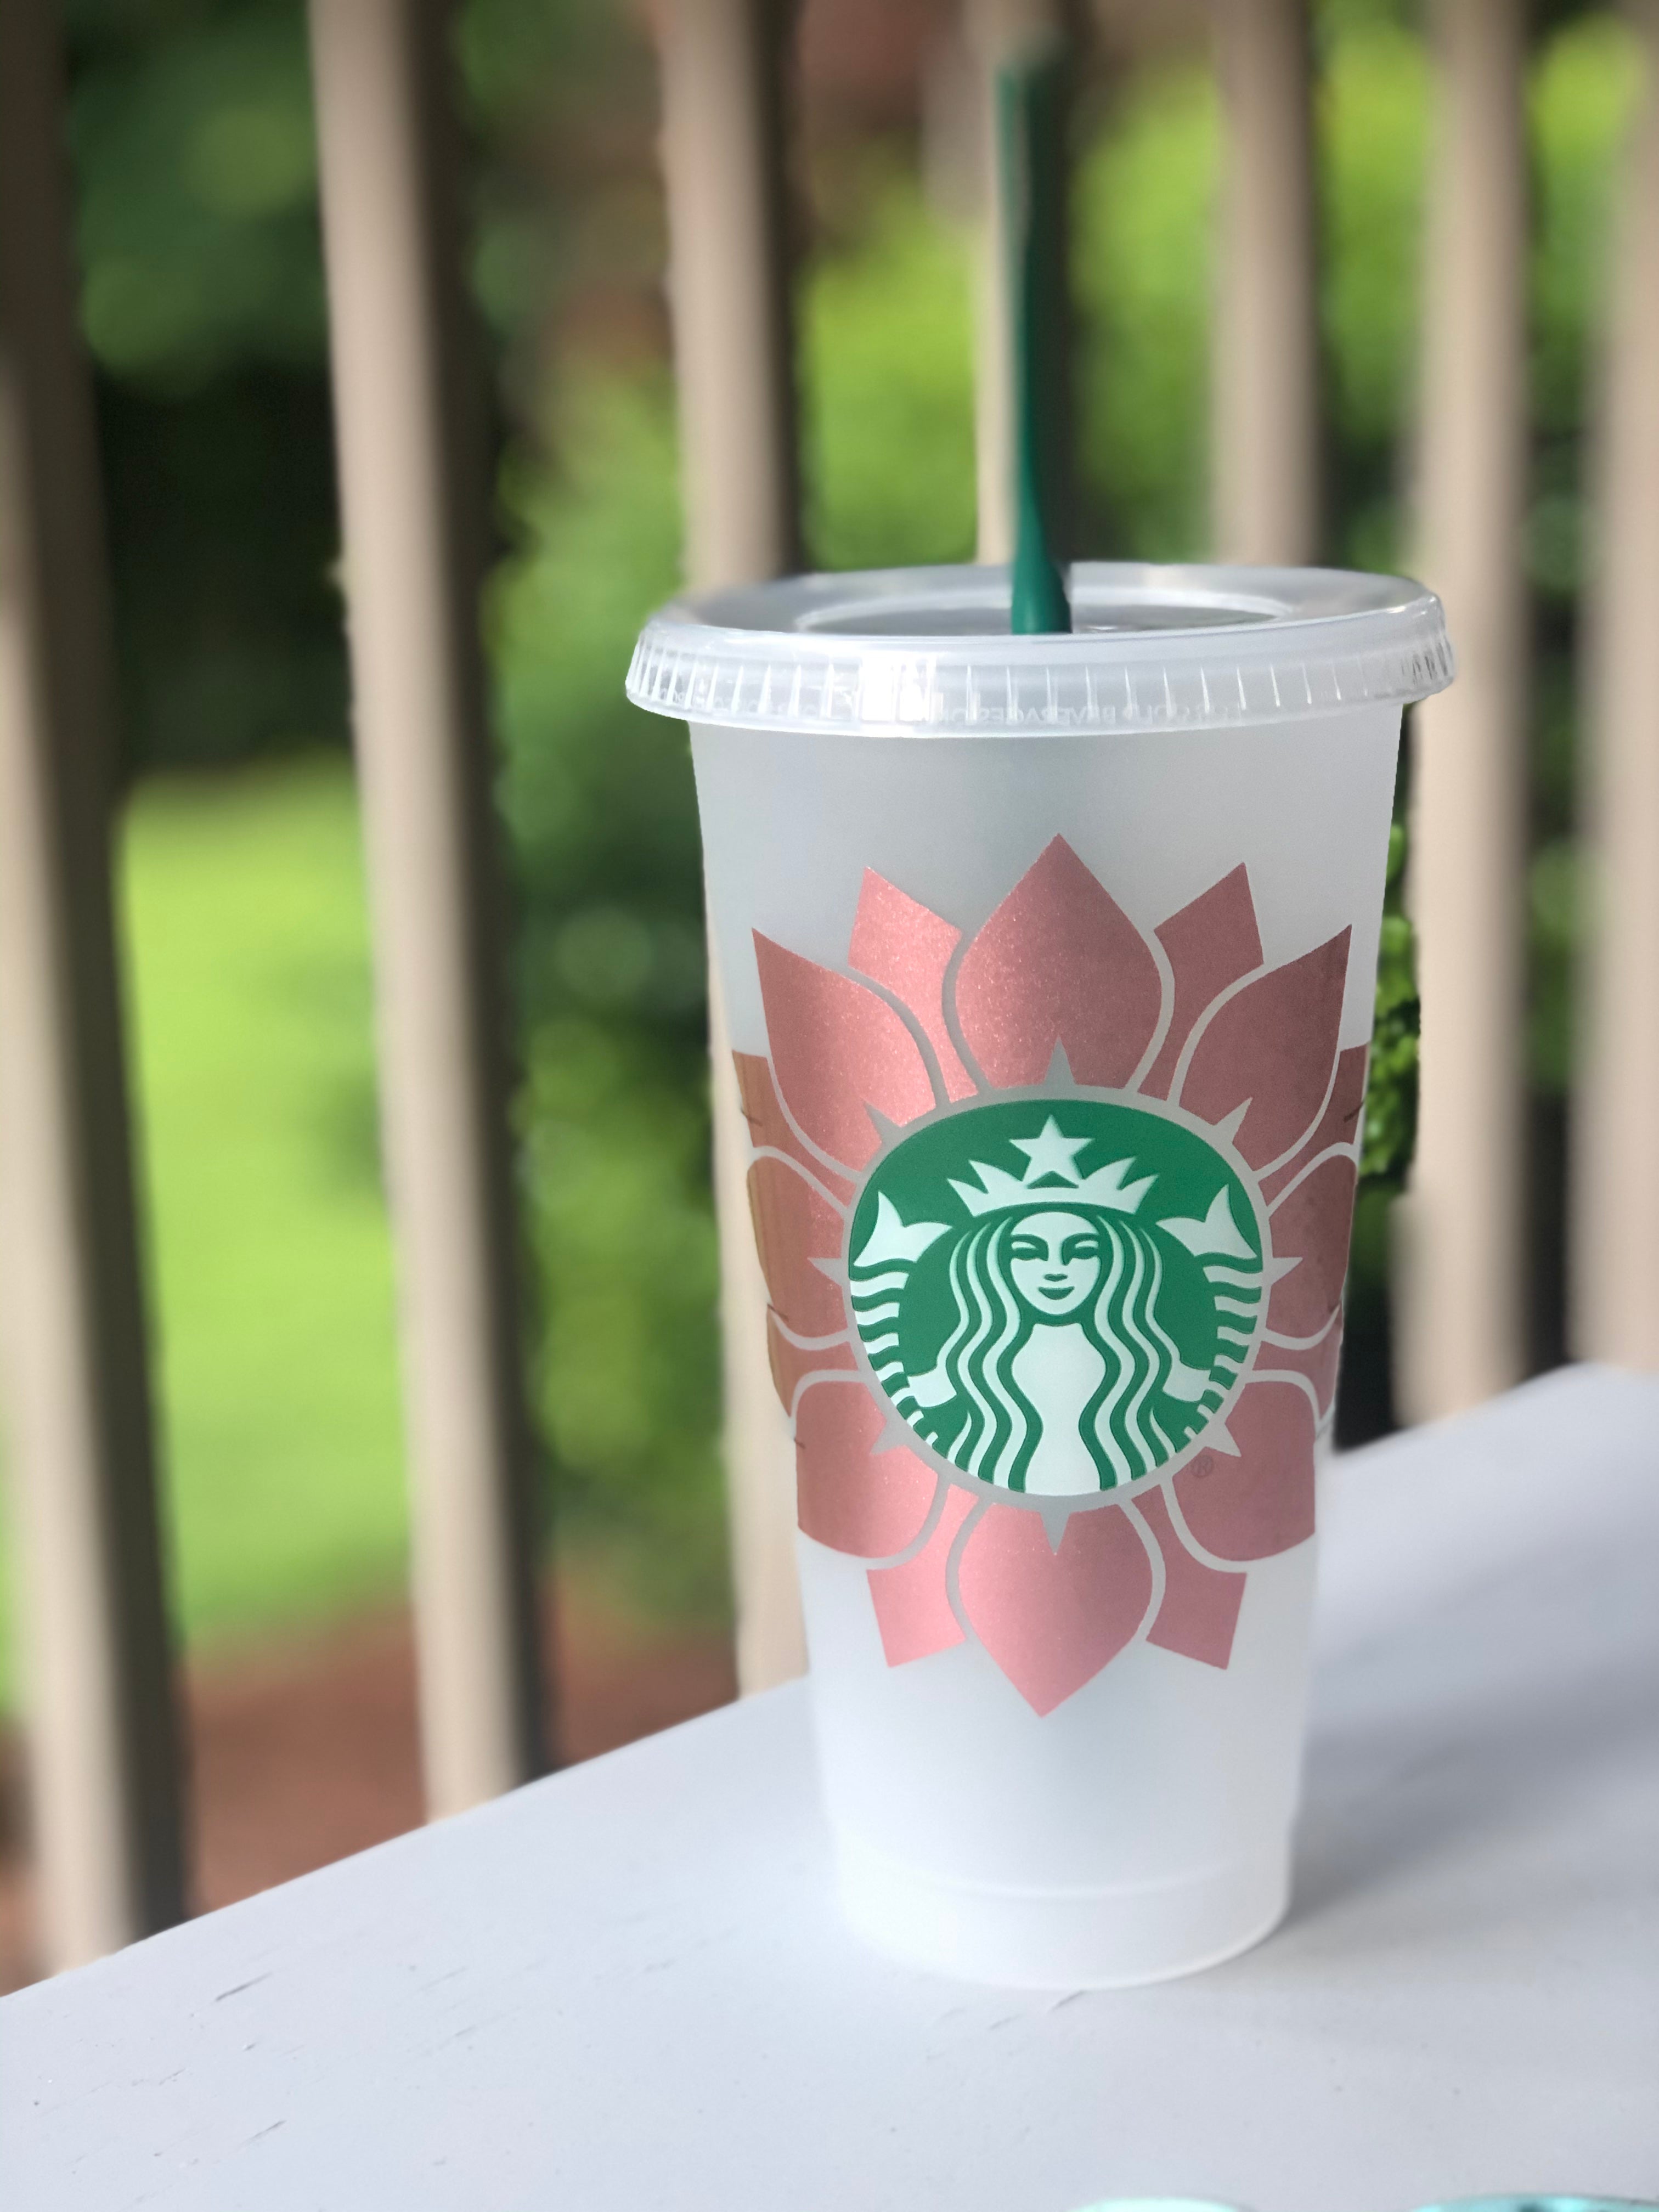 Pink Retro Daisy Starbucks Cup Personalized Starbucks Cold Cup